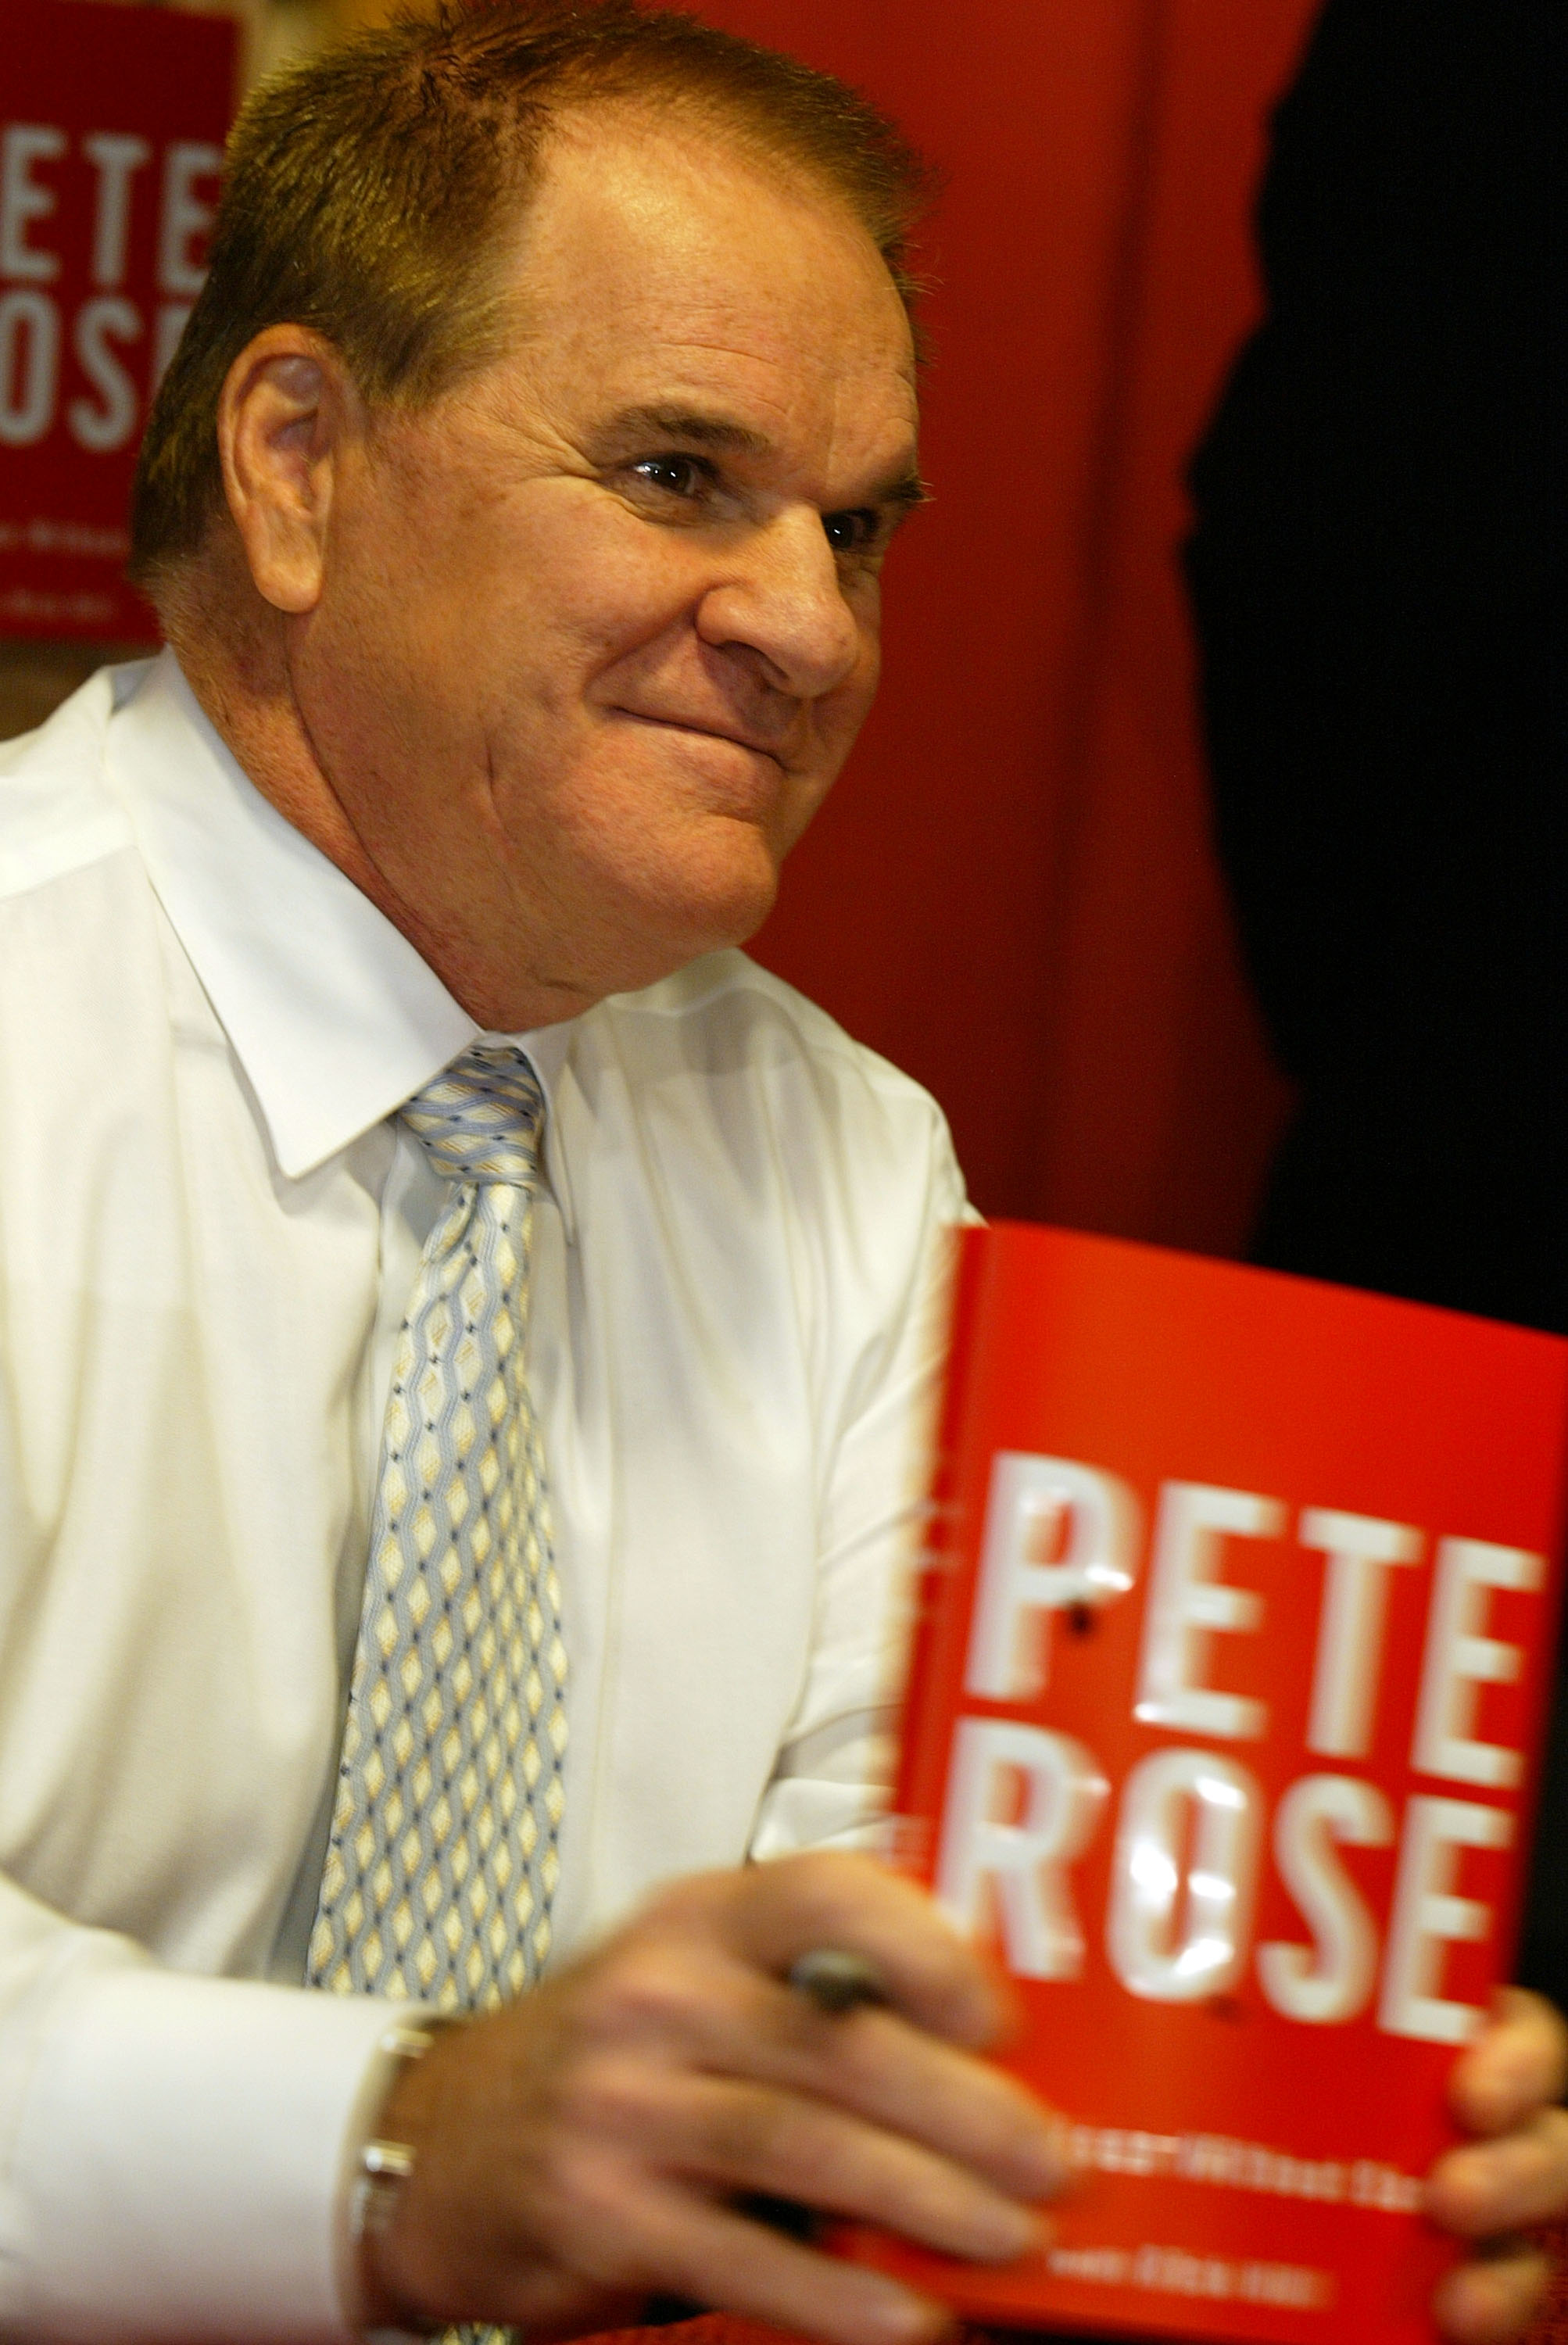 NEW YORK - JANUARY 9: Controversial former baseball great Pete Rose attends a signing for his autobiography 'My Prison Without Bars' January 9, 2004 in New York City. In the newly-released book, Rose admitted to gambling on the Cincinnati Reds while he ma